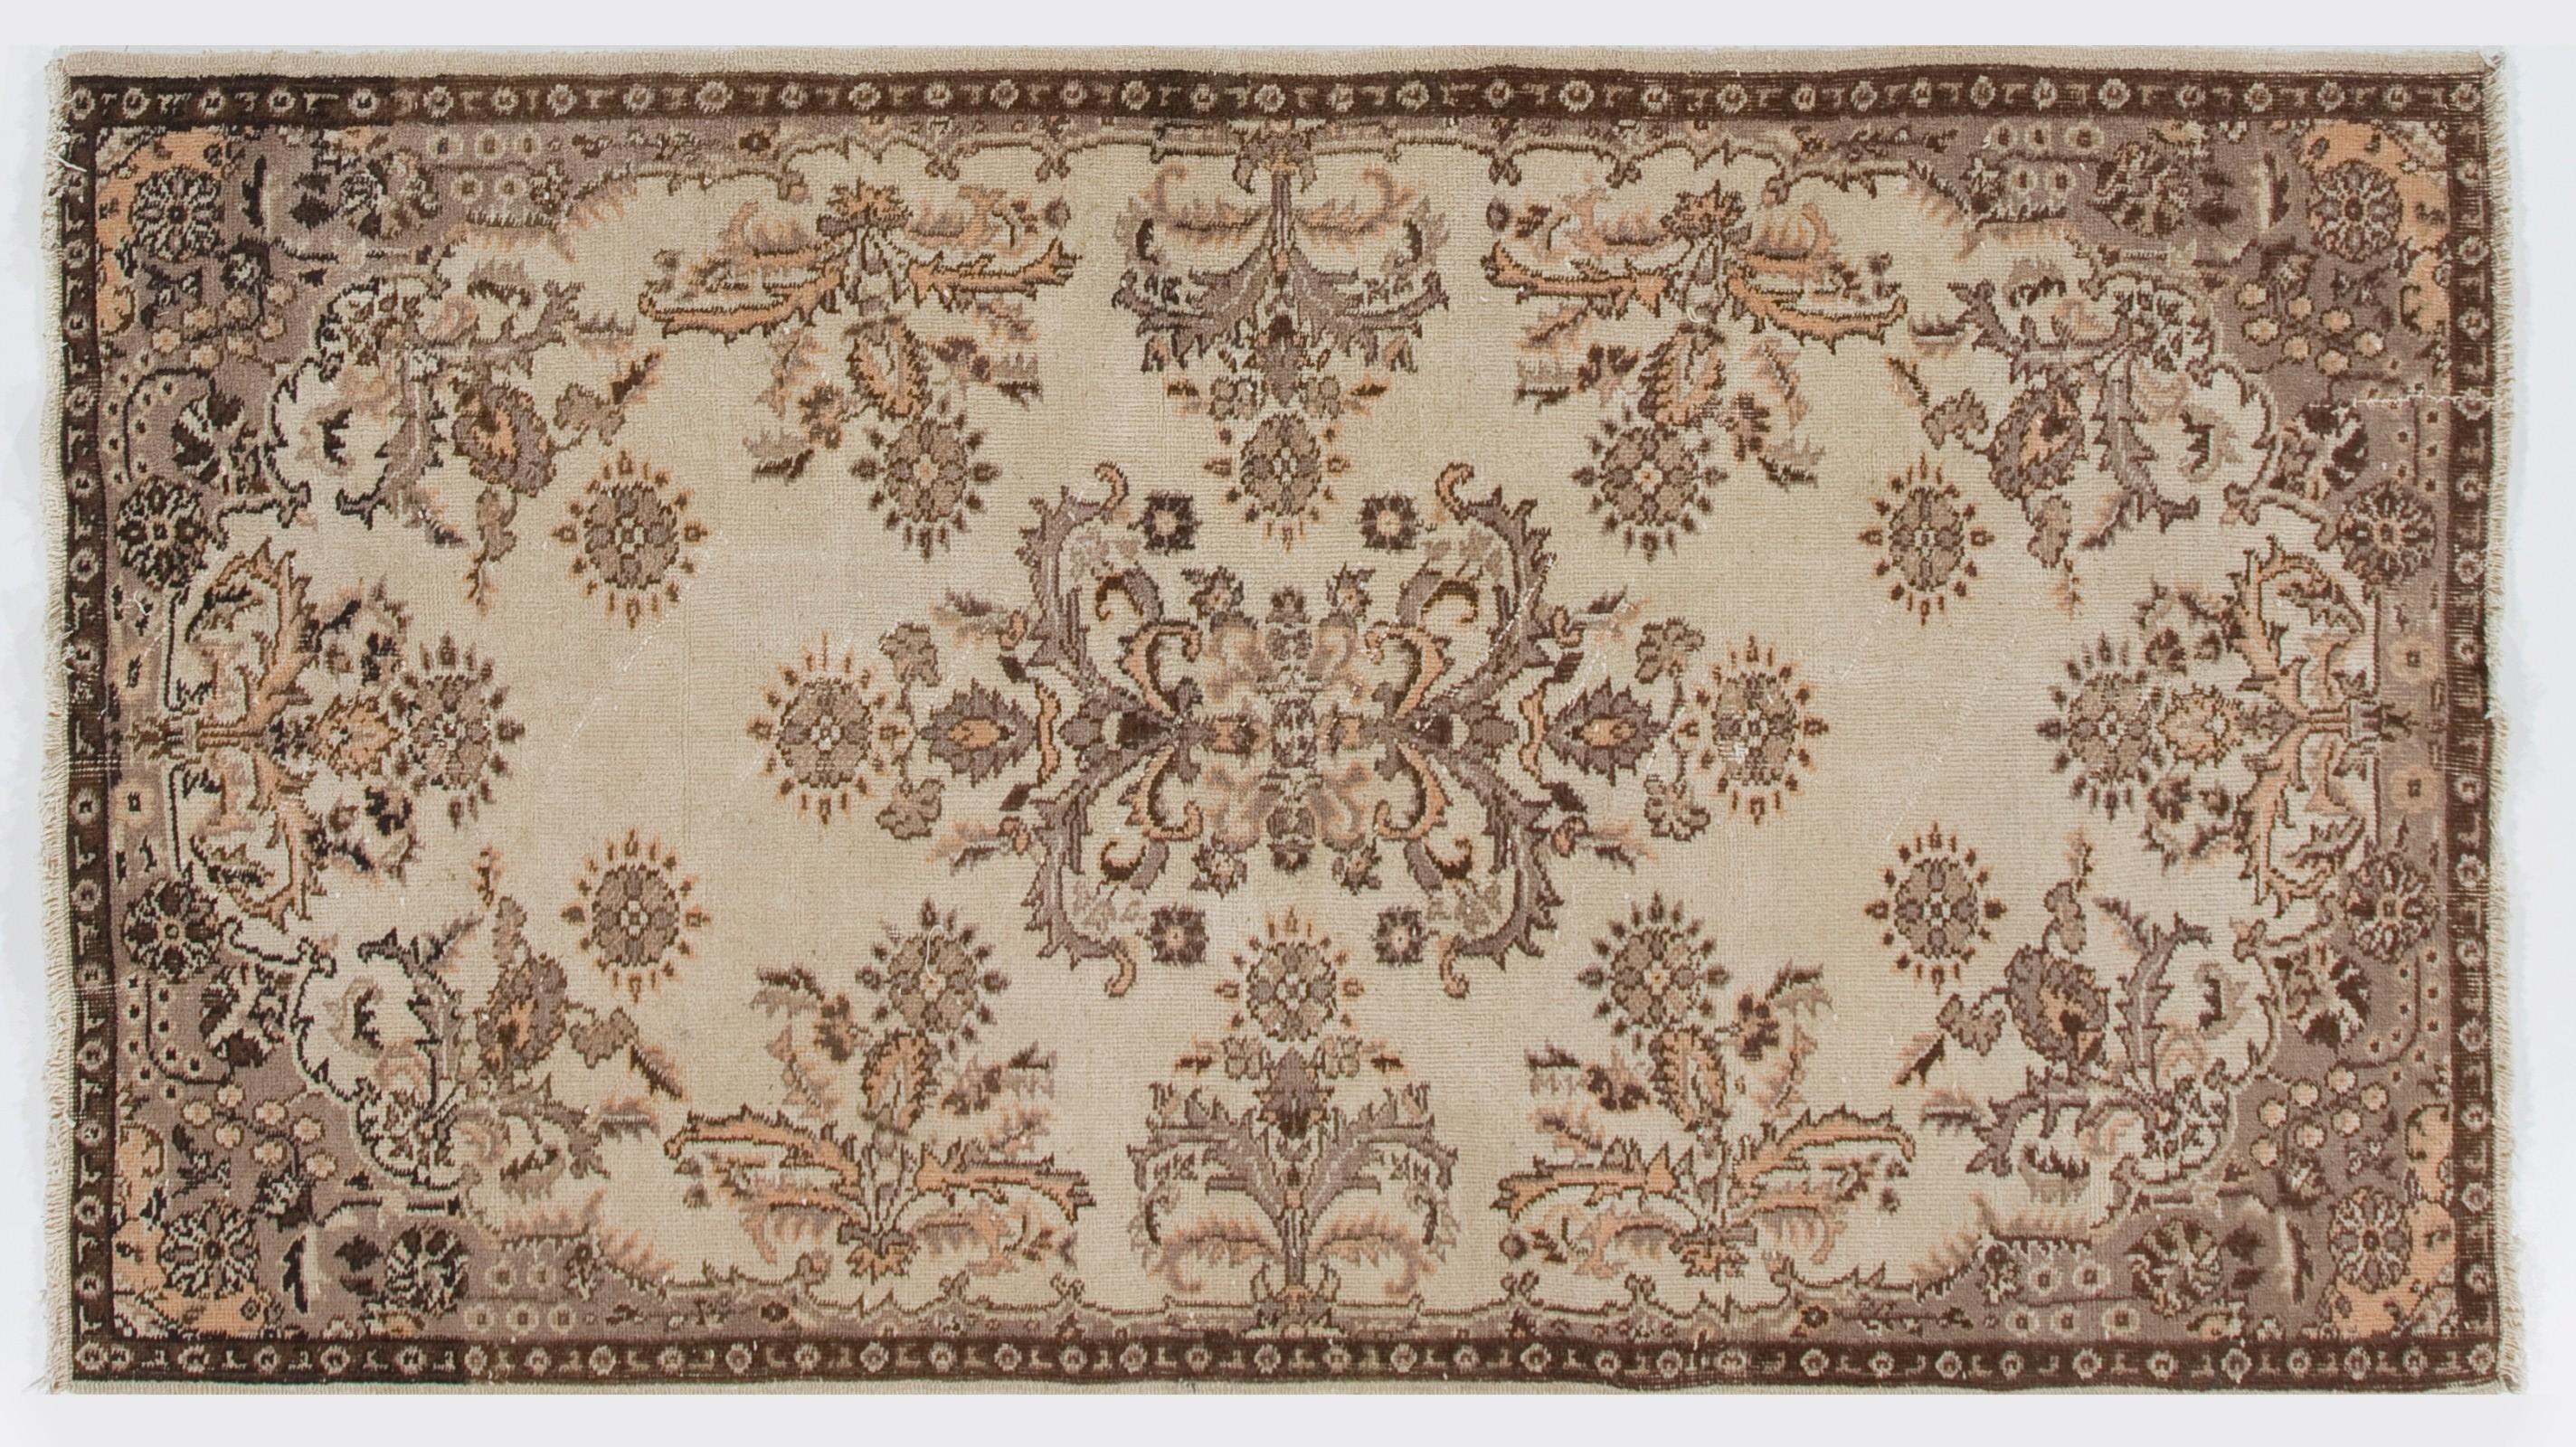 Hand-Knotted 4x6.8 ft Handmade 1960s Floral Garden Design Turkish Rug in Beige & Brown Colors For Sale